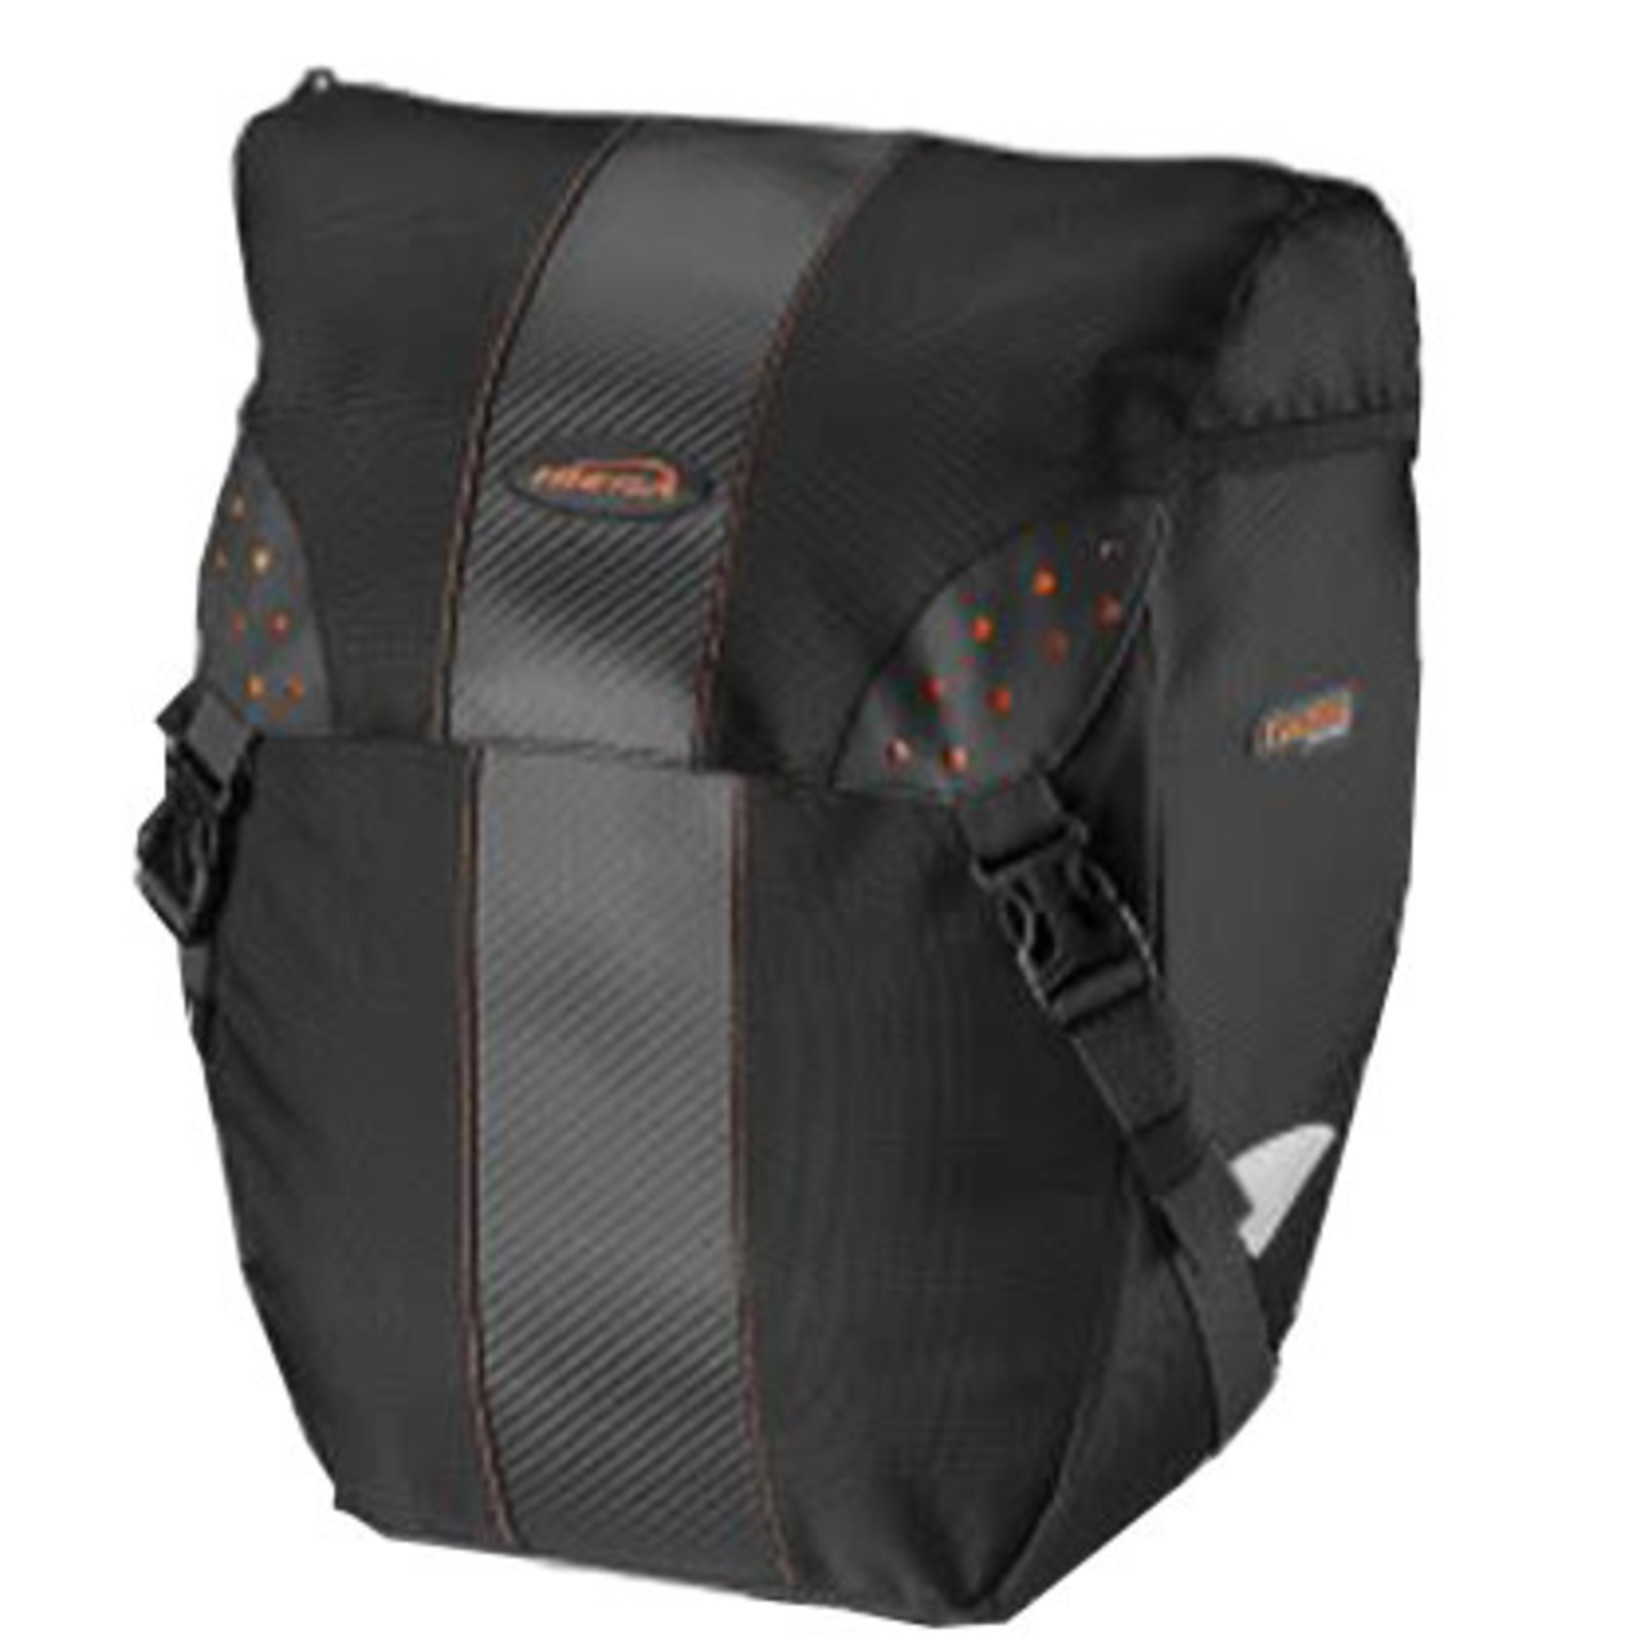 Pannier Bag - Pak Rak With Quick Clip-On System - Sold As One - Capacity: 15L